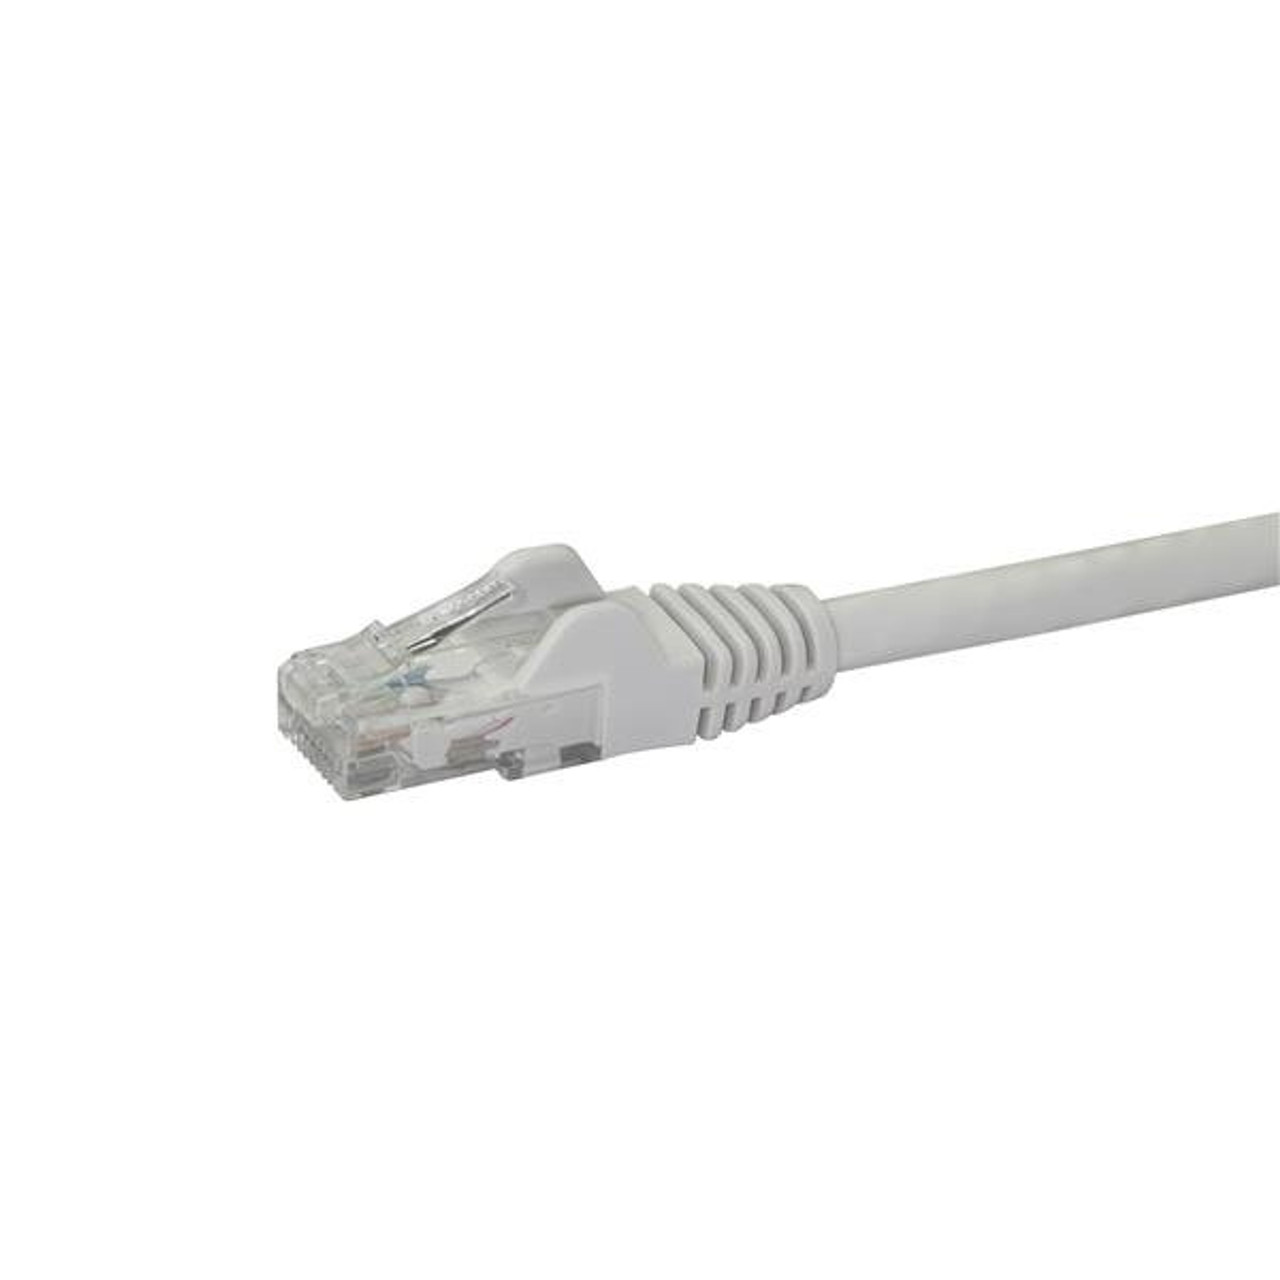 StarTech.com 2m CAT6 Ethernet Cable - White CAT 6 Gigabit Ethernet Wire -650MHz 100W PoE RJ45 UTP Network/Patch Cord Snagless w/Strain Relief Fluke Tested/Wiring is UL Certified/TIA